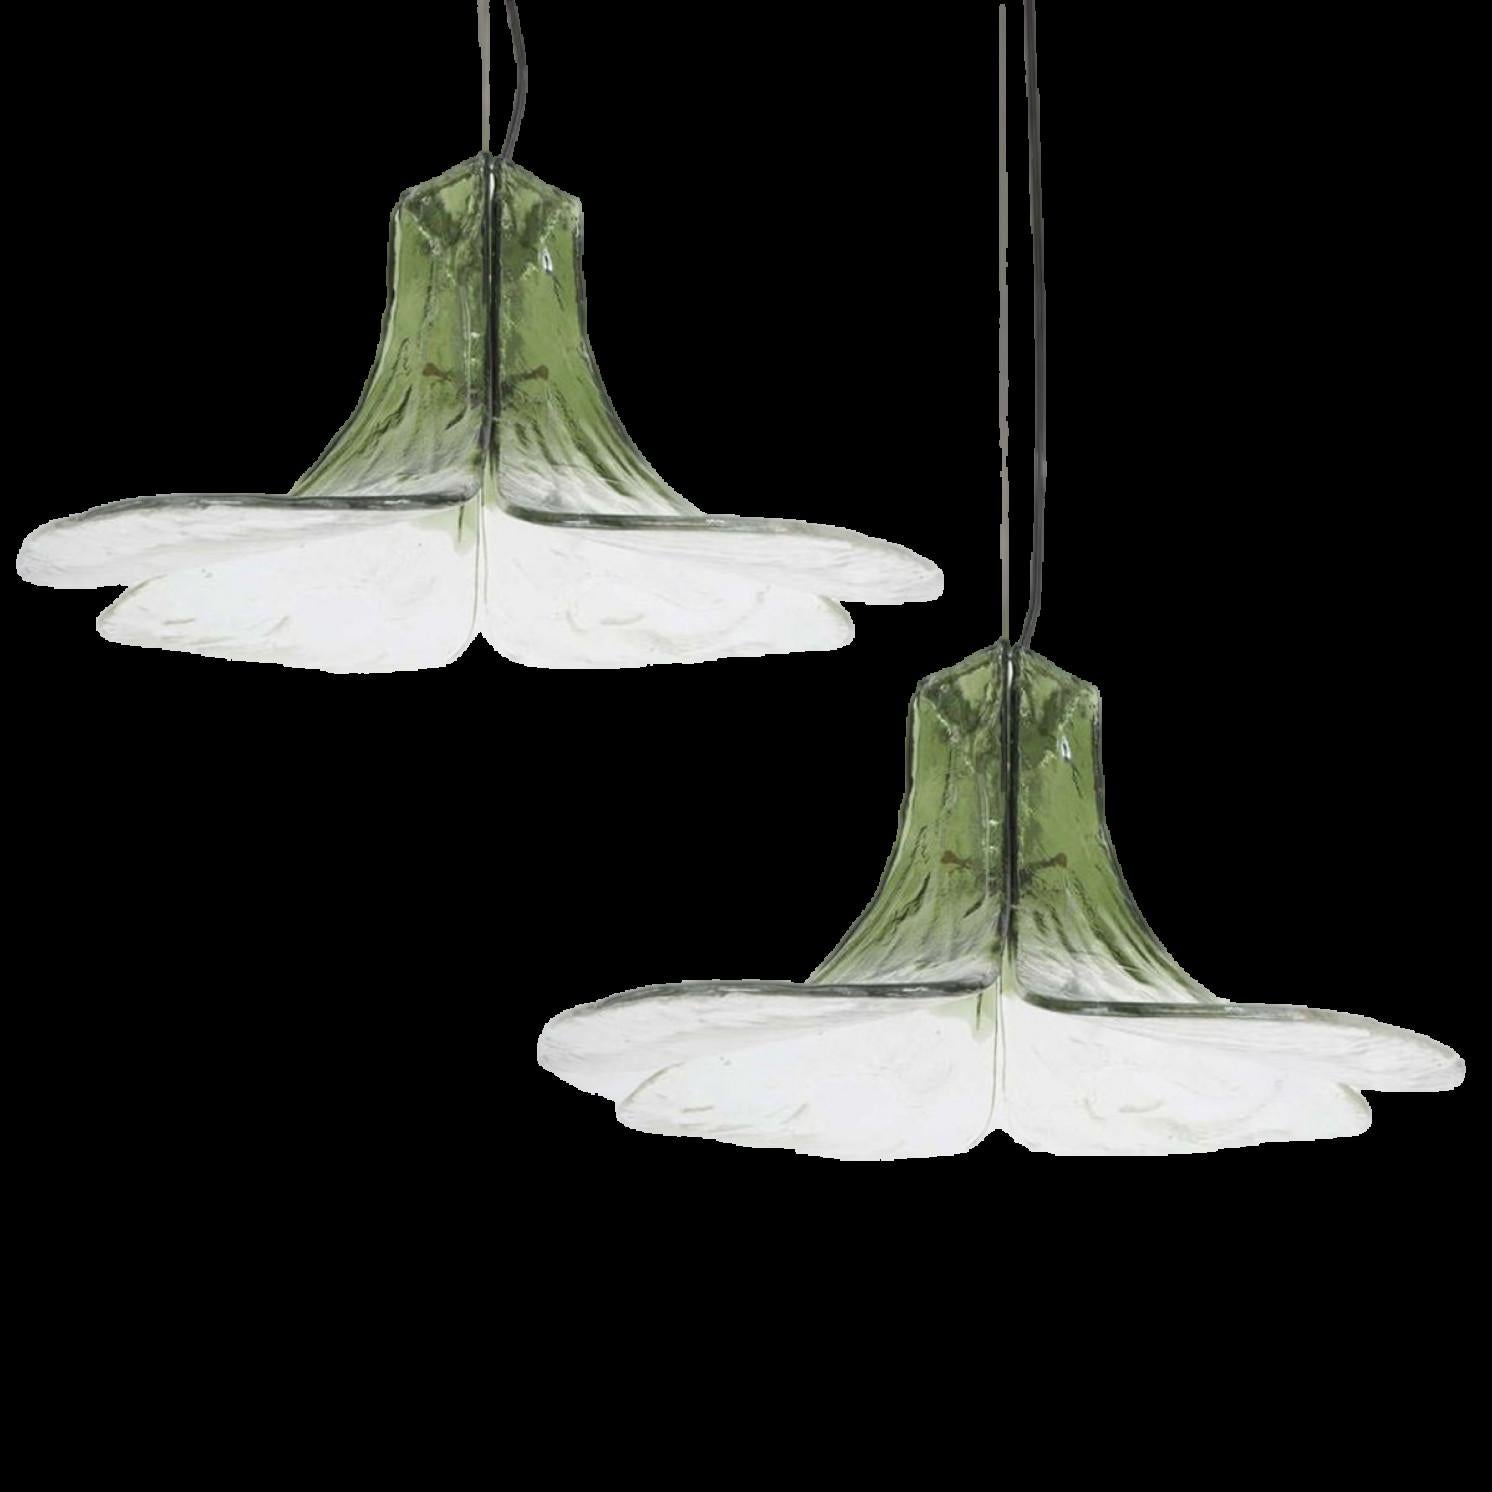 A pair of exceptional pendant lamps model LS185 by Carlo Nason for Mazzega.
Four crystal clear and green leaves compose this beautiful piece made in thick handmade Murano glass.

Measures: H 16.93” (43 cm), D 23.62